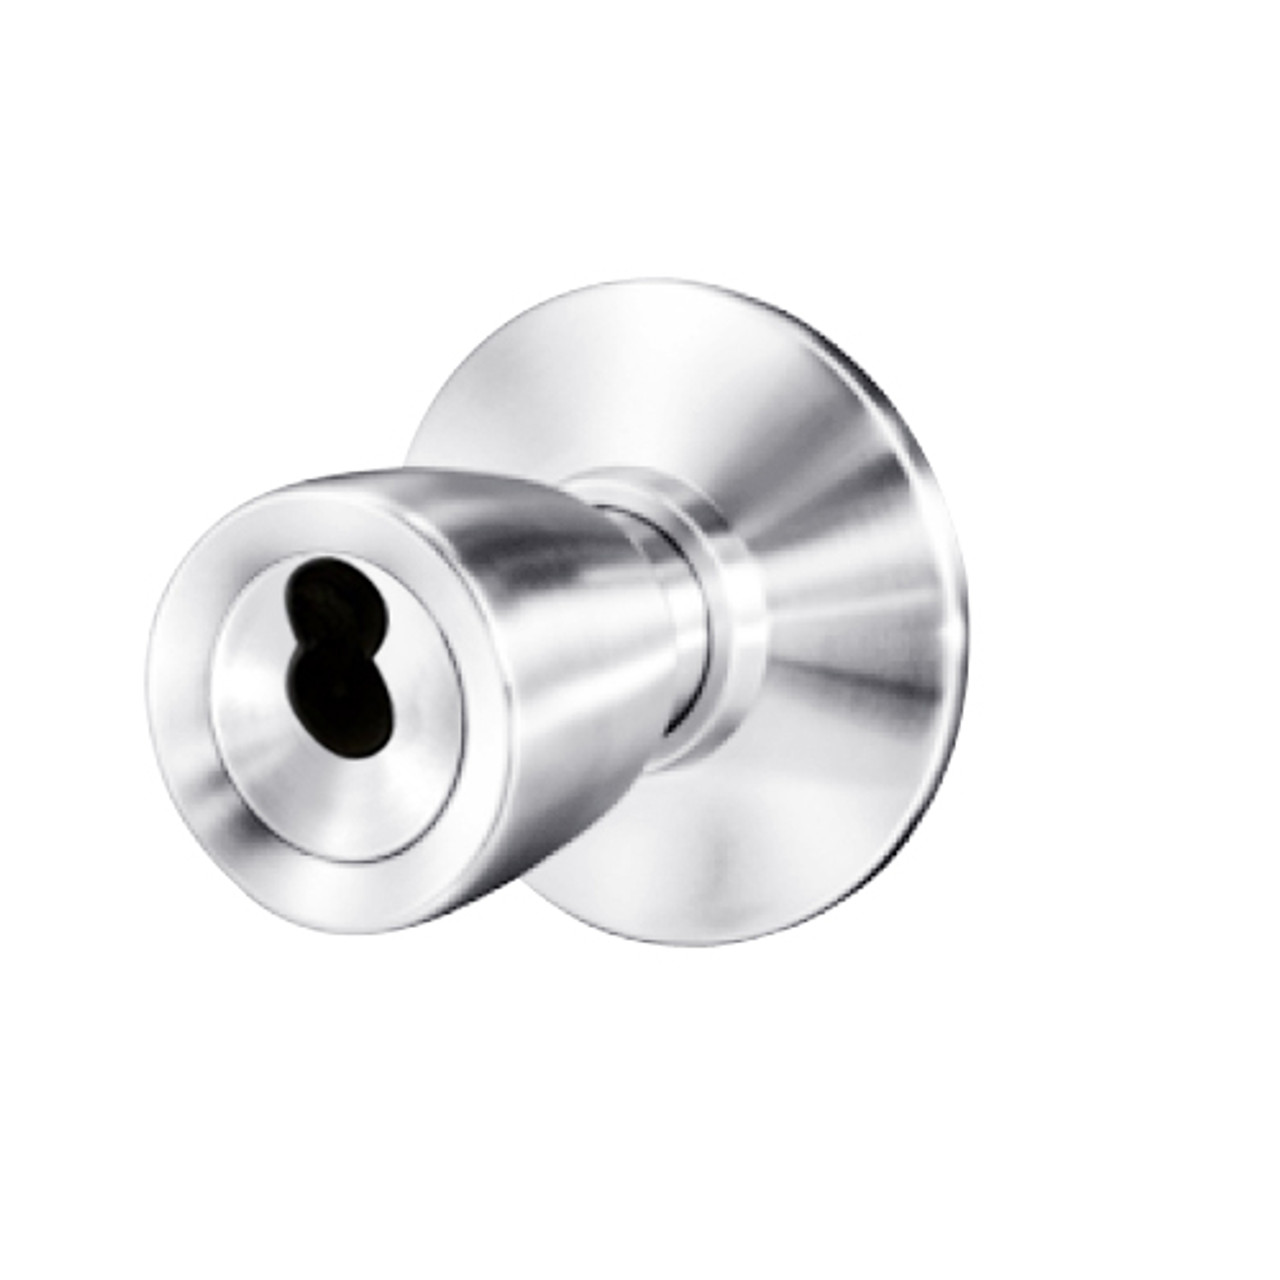 8K47YD6DS3625 Best 8K Series Exit Heavy Duty Cylindrical Knob Locks with Tulip Style in Bright Chrome